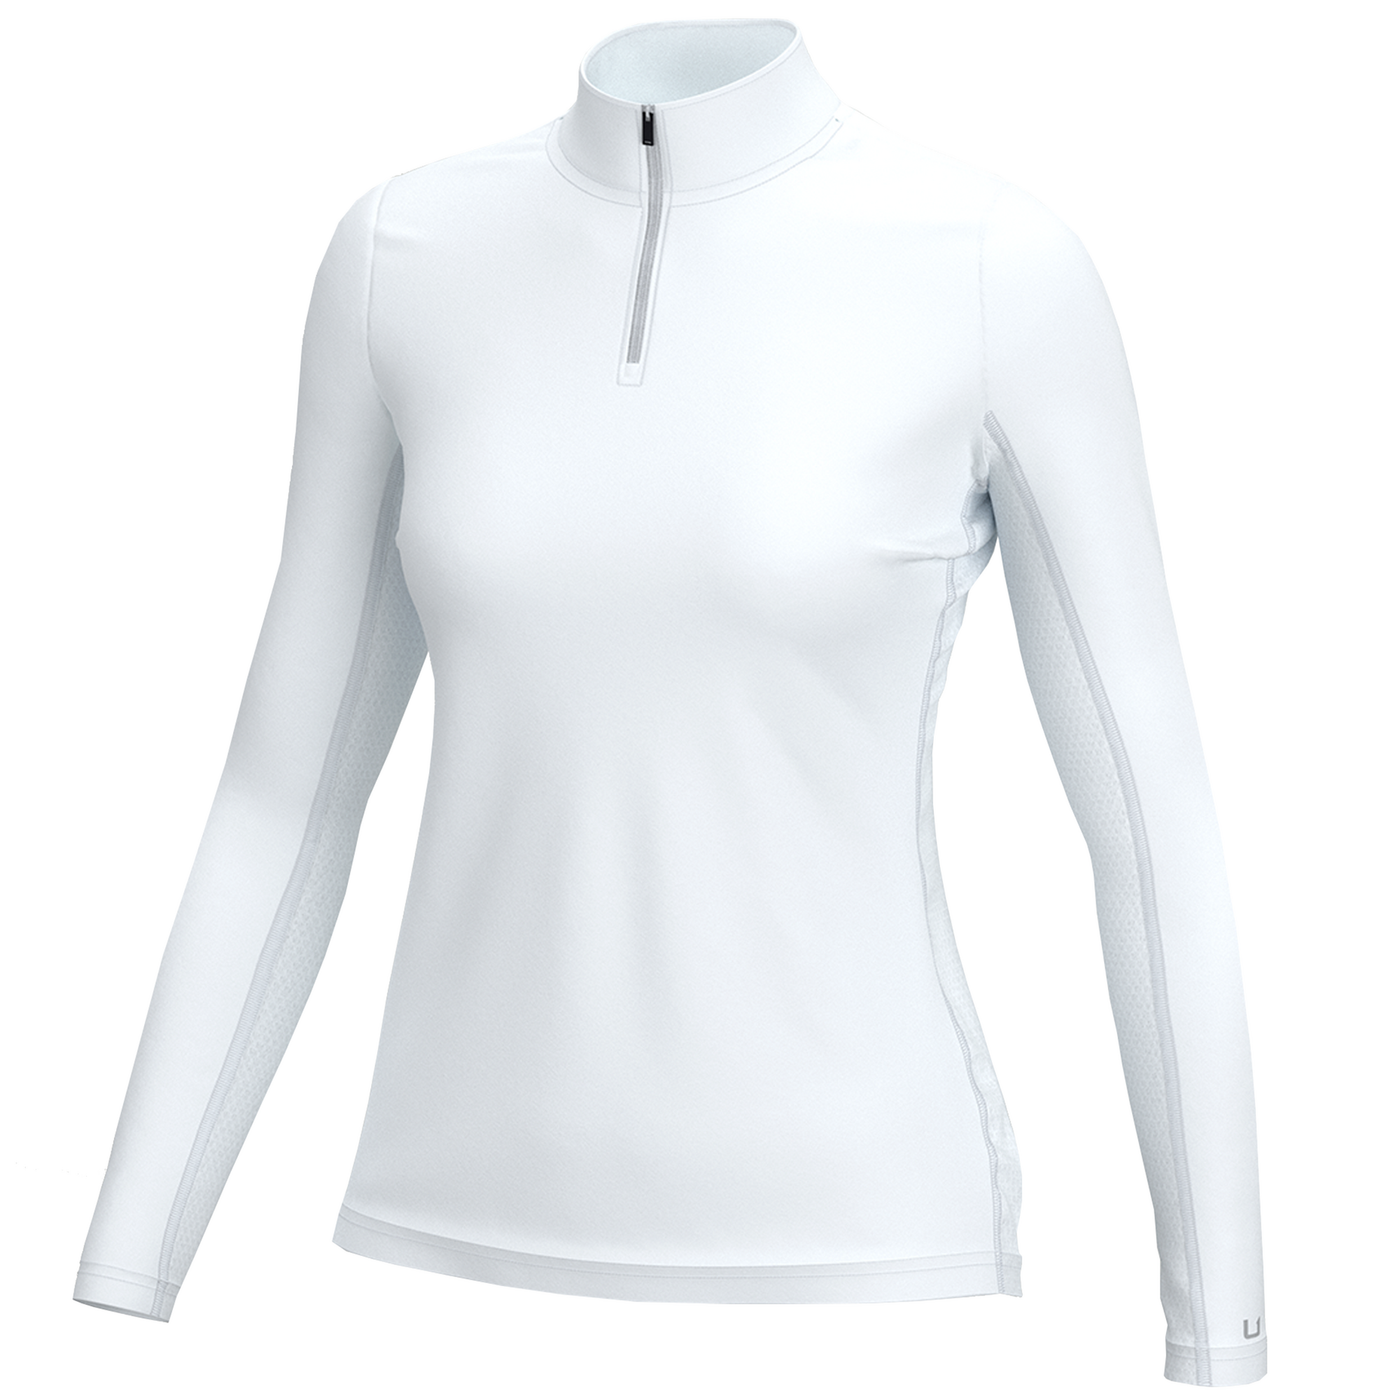 Huk Women's Icon x Long Sleeve H6120083 - White Small